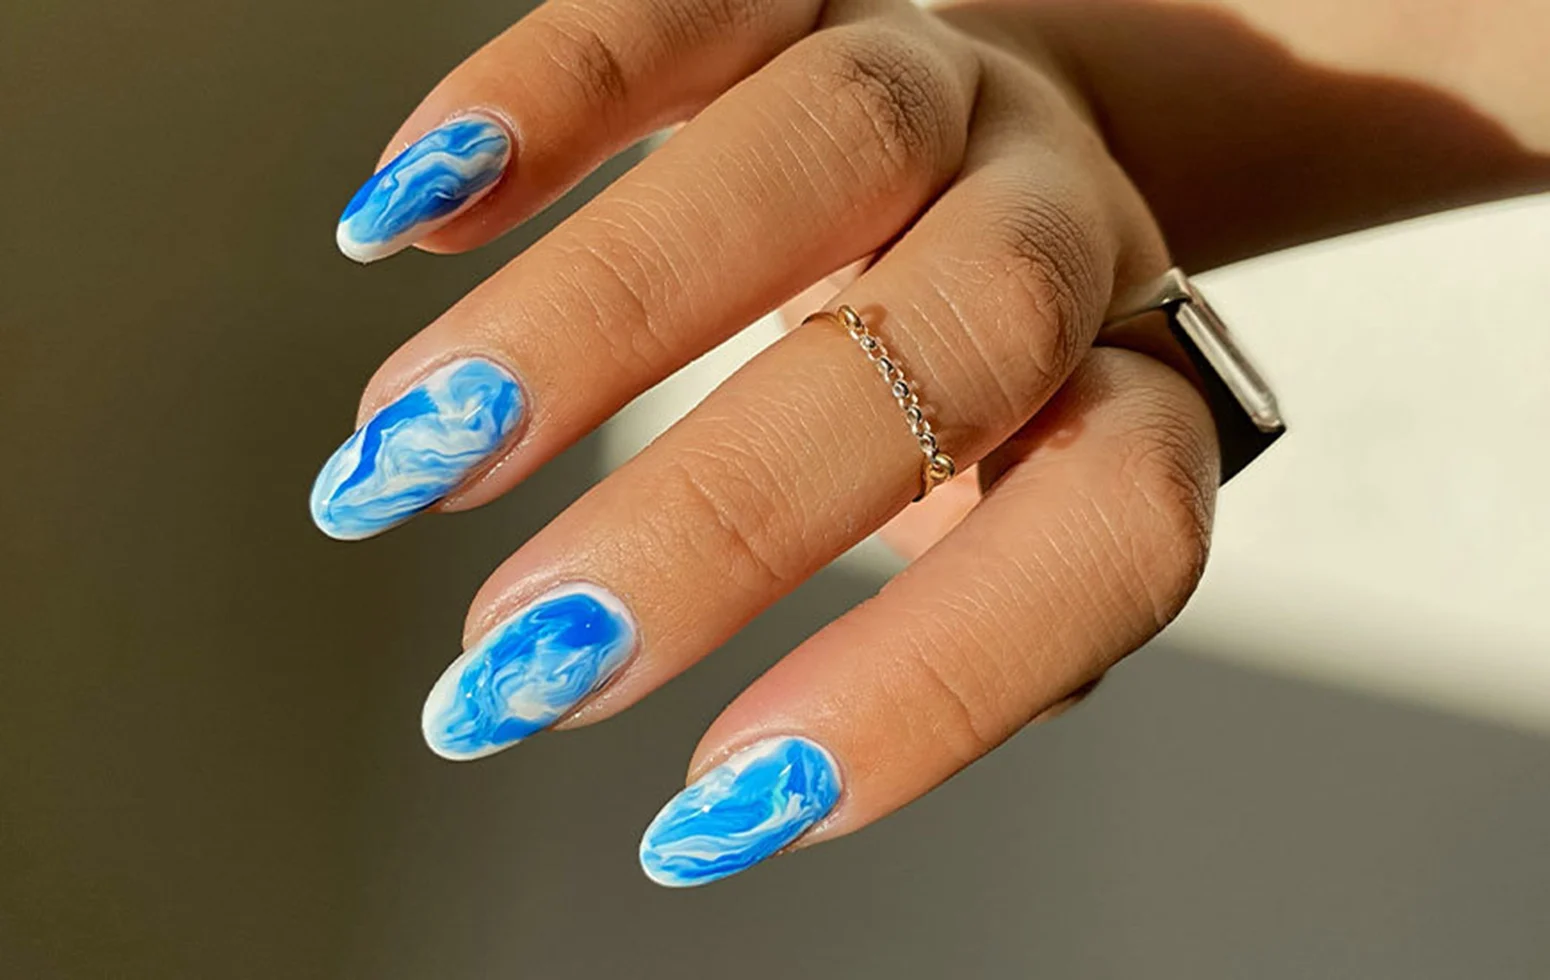 Blue Nail Art Challenge for Pros